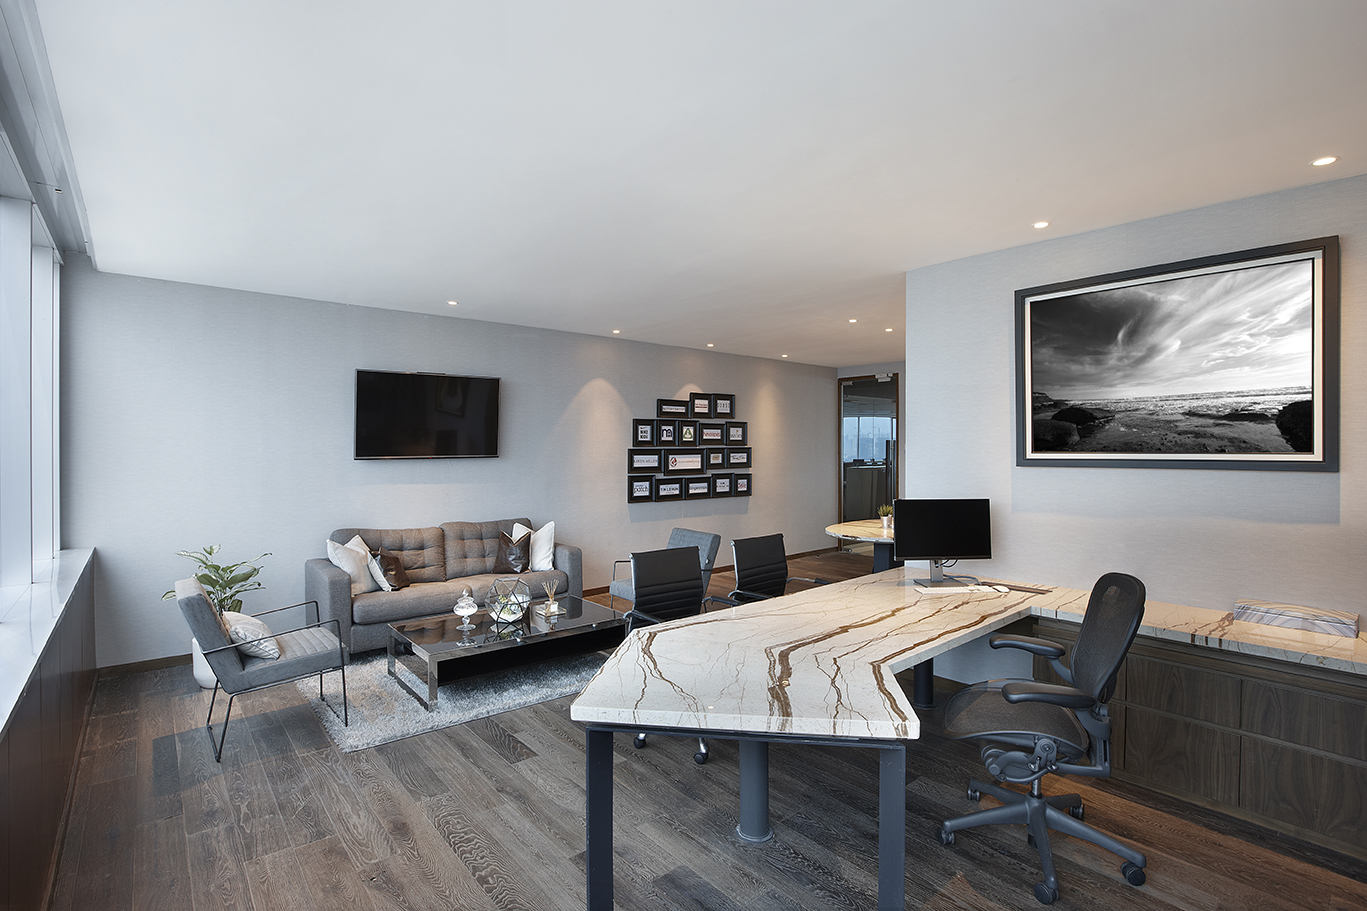 5 Steps to Designing an Executive Office Room - Blog : High Street